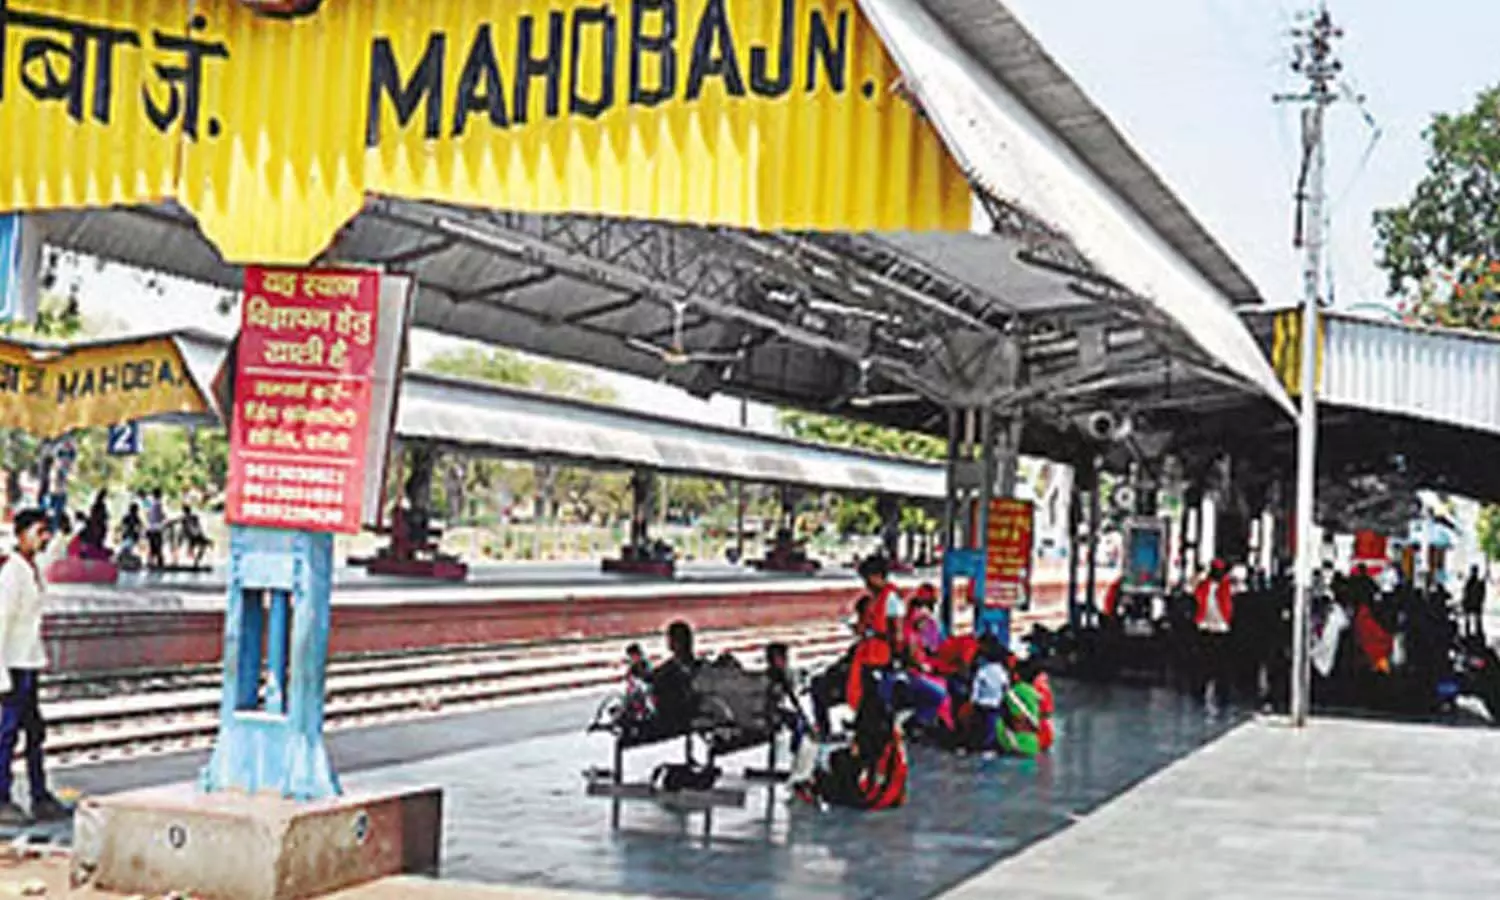 Mahoba News: Woman jumped from moving train after leaving son in railway platform, condition very critical